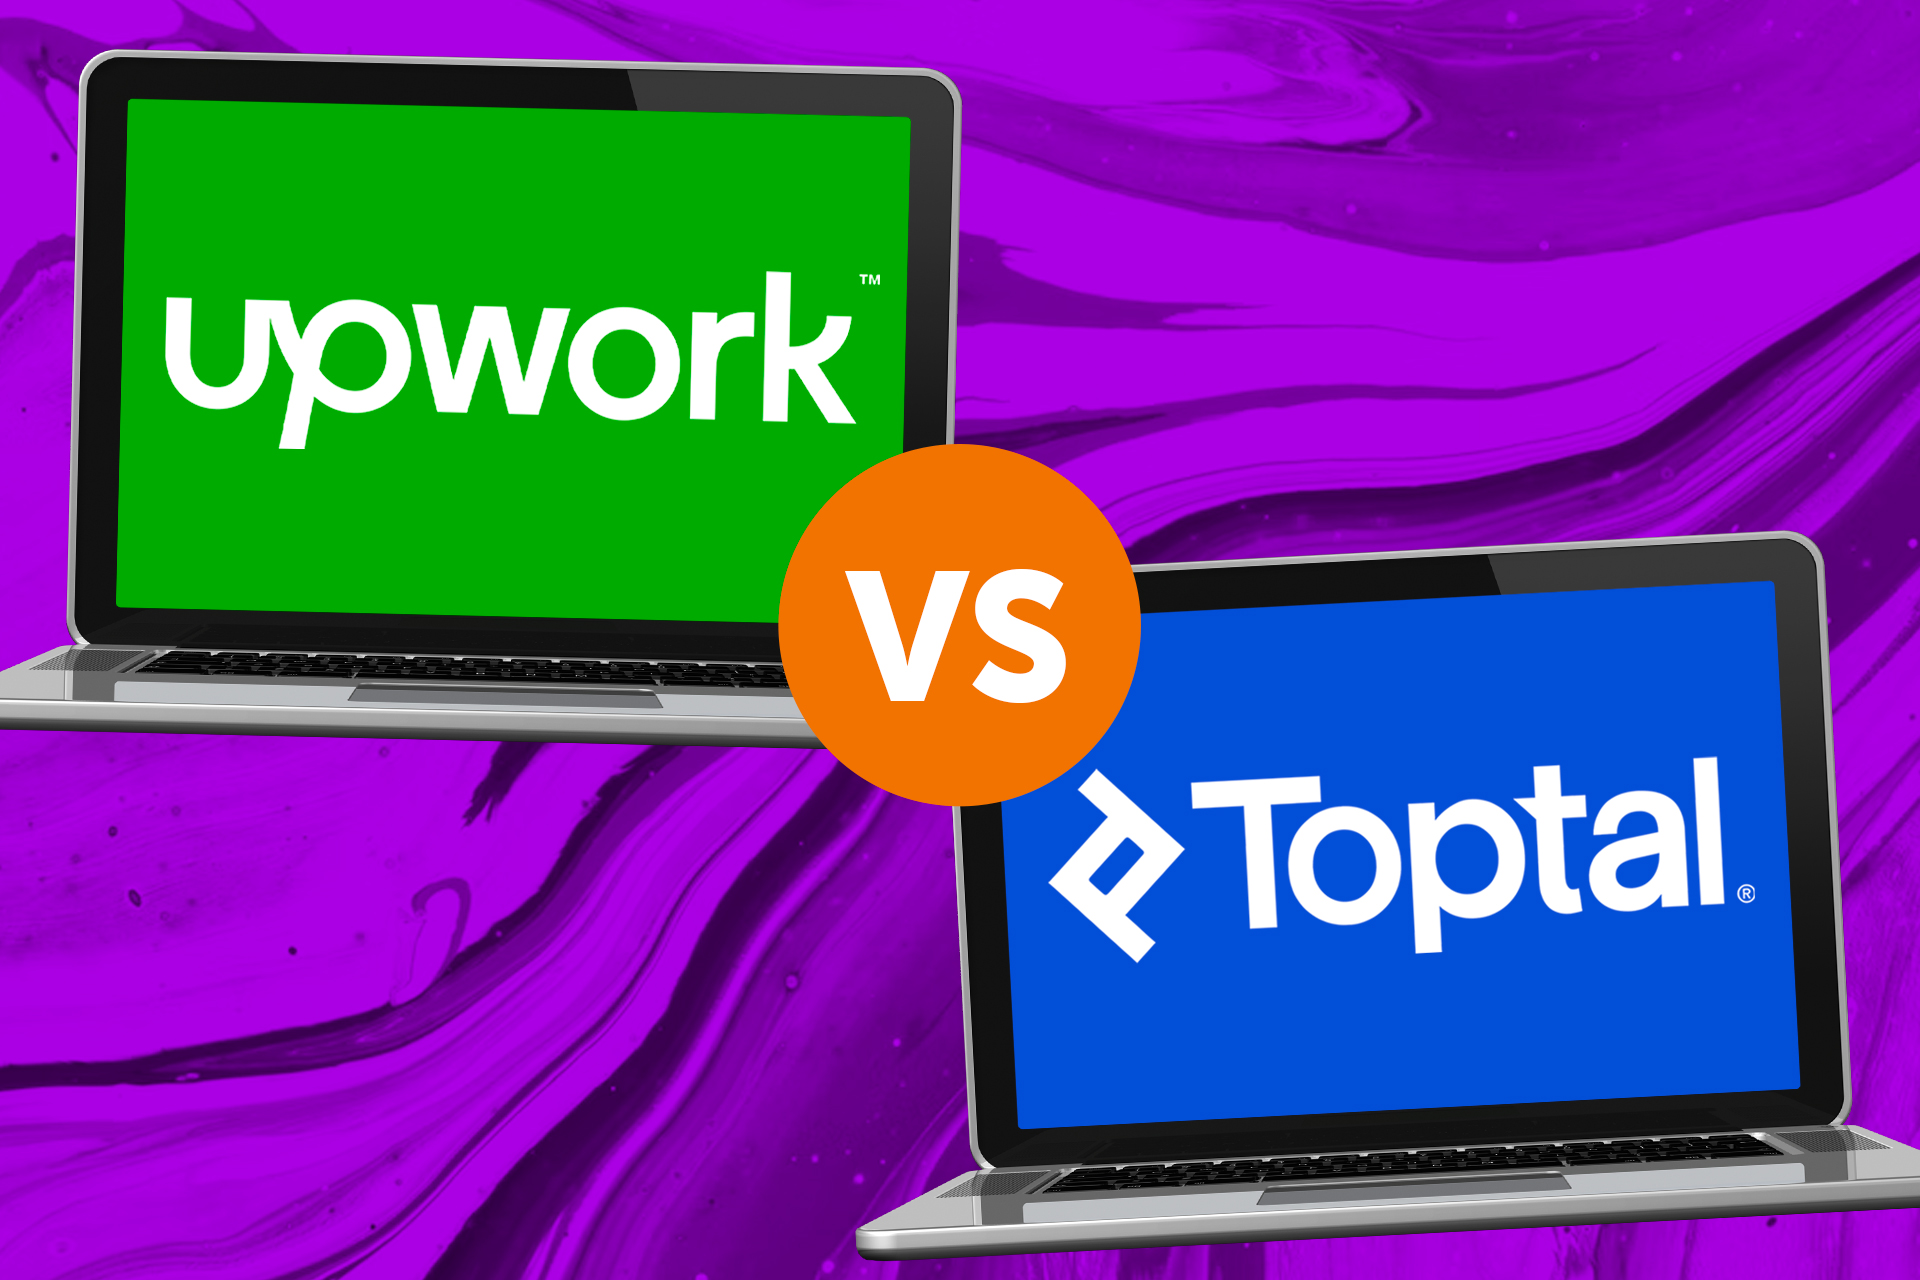 Upwork vs Toptal: Which site is the best for Freelancers?